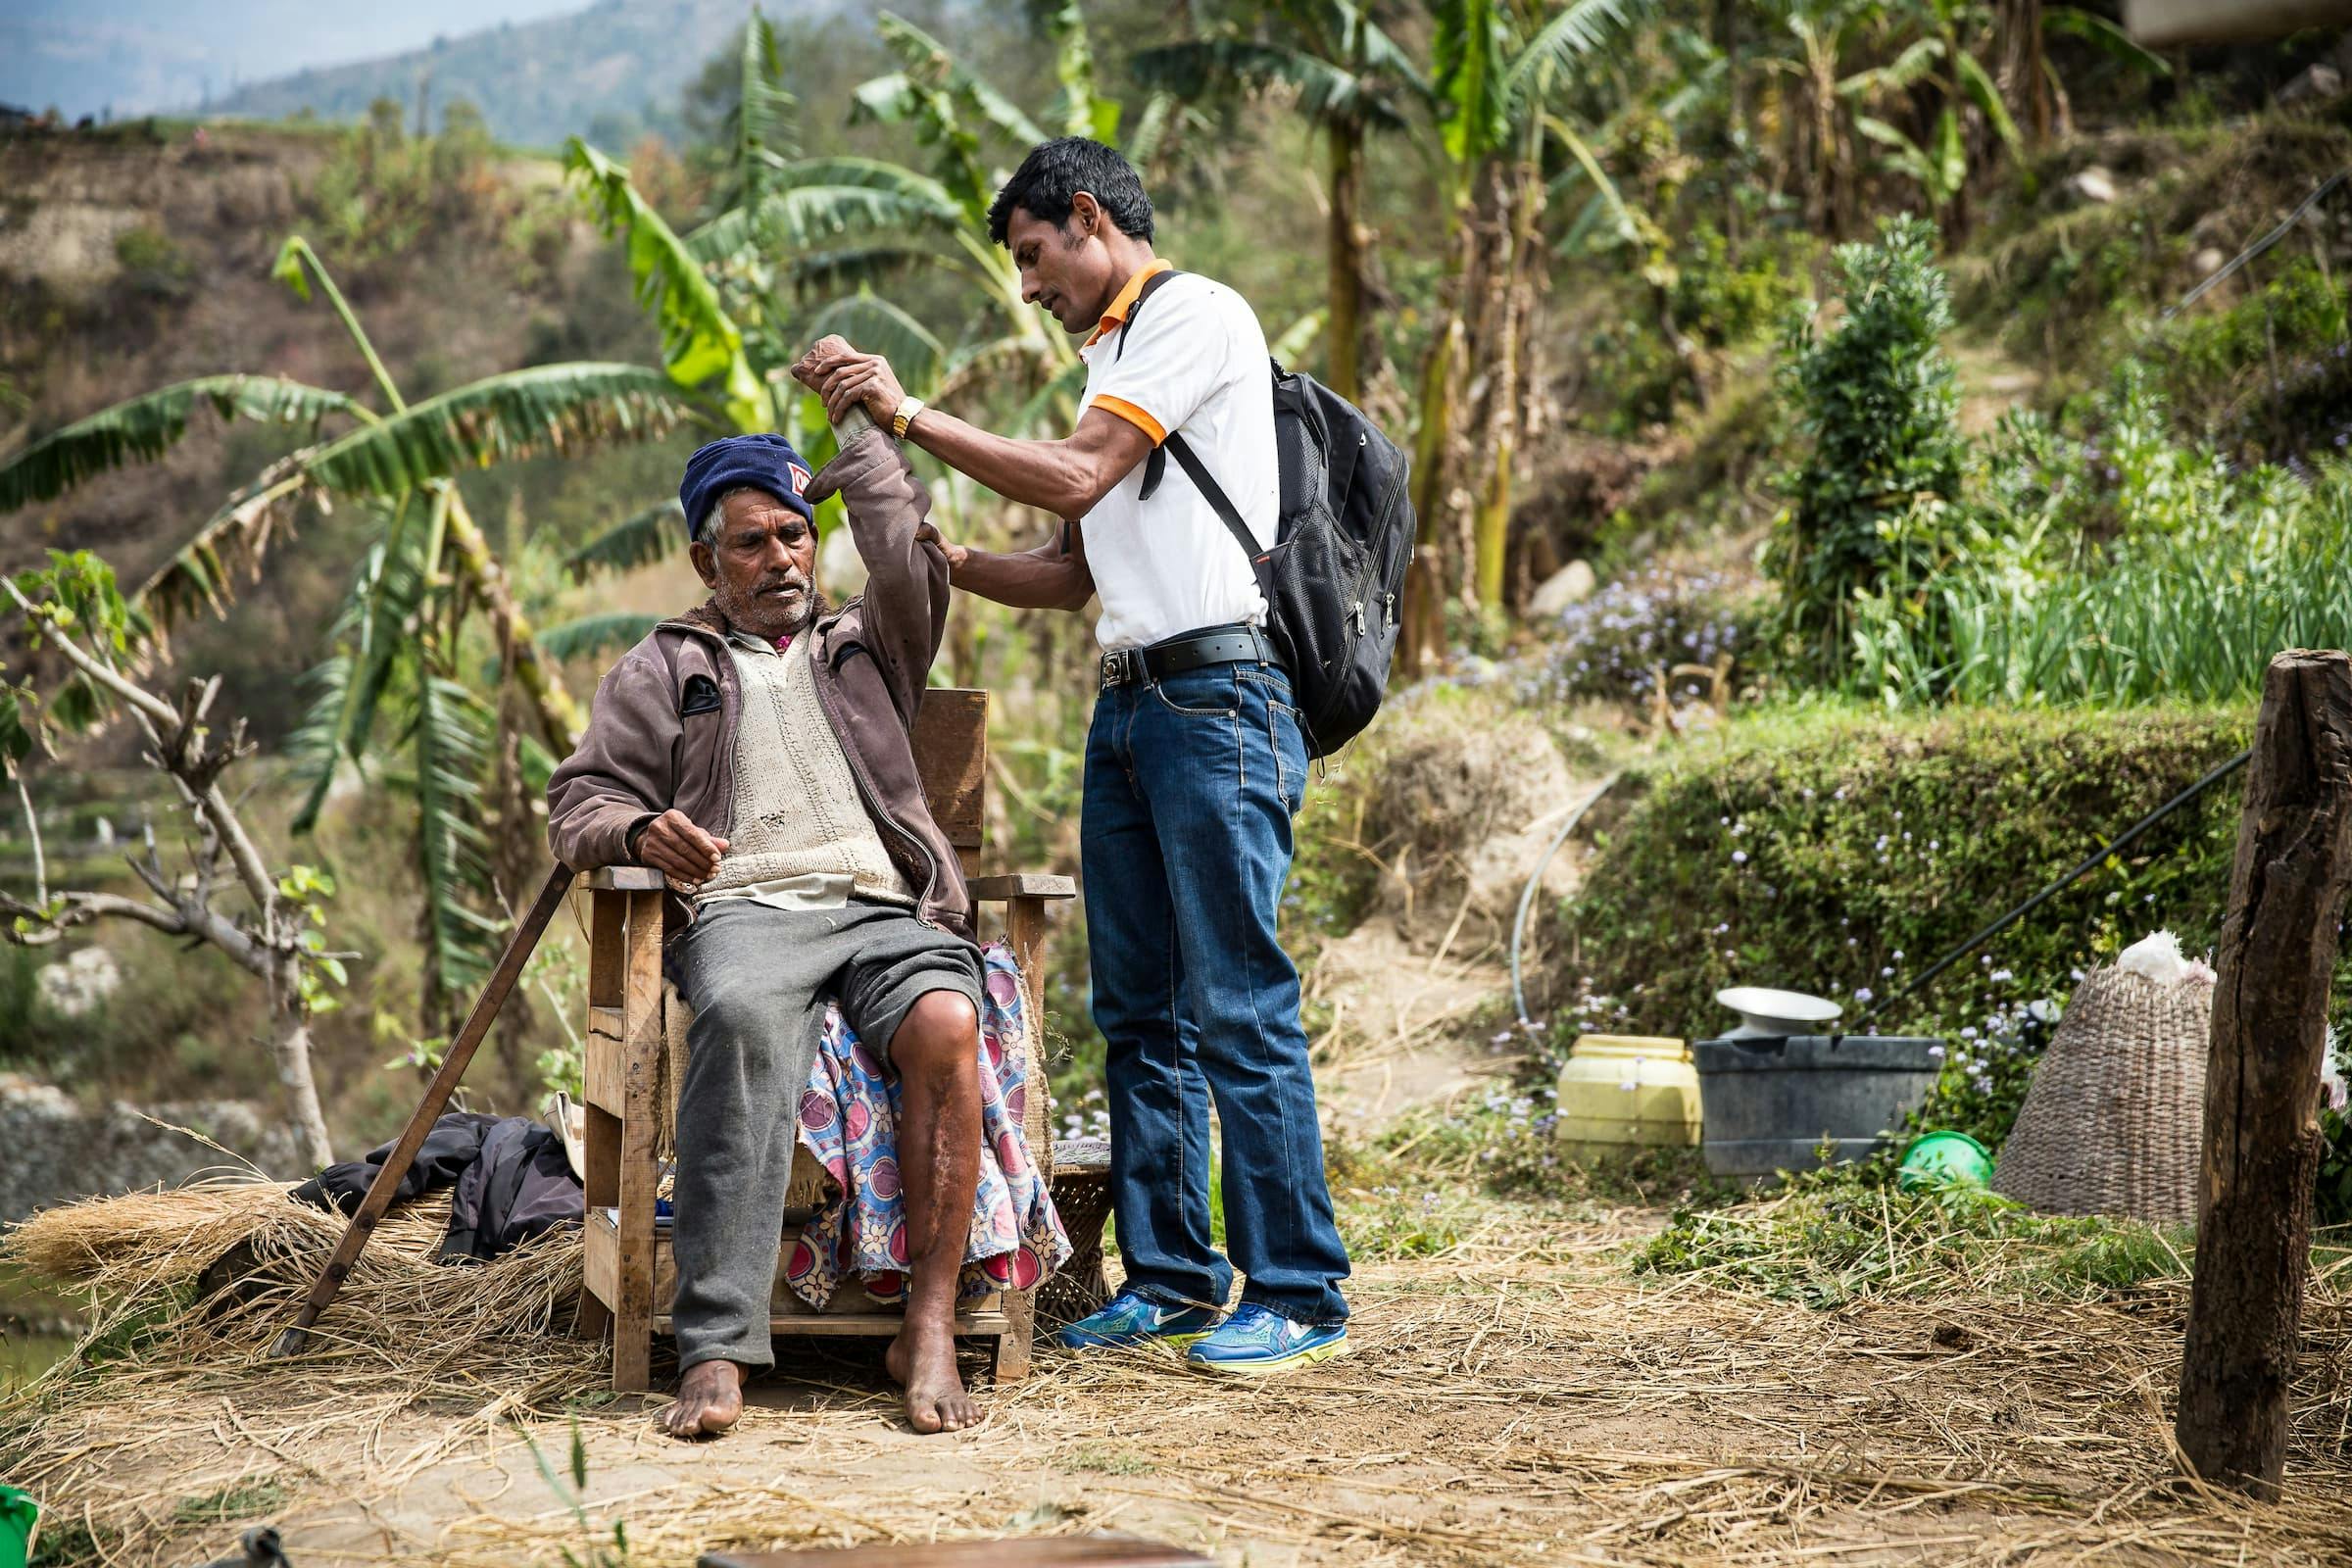 A young FAIRMED worker stretches the arm of an old man to see if his leprosy disease affects his mobility. The old man is sitting on a chair outside. Palm trees and trees can be seen in the background. The scenery is set in rural India.